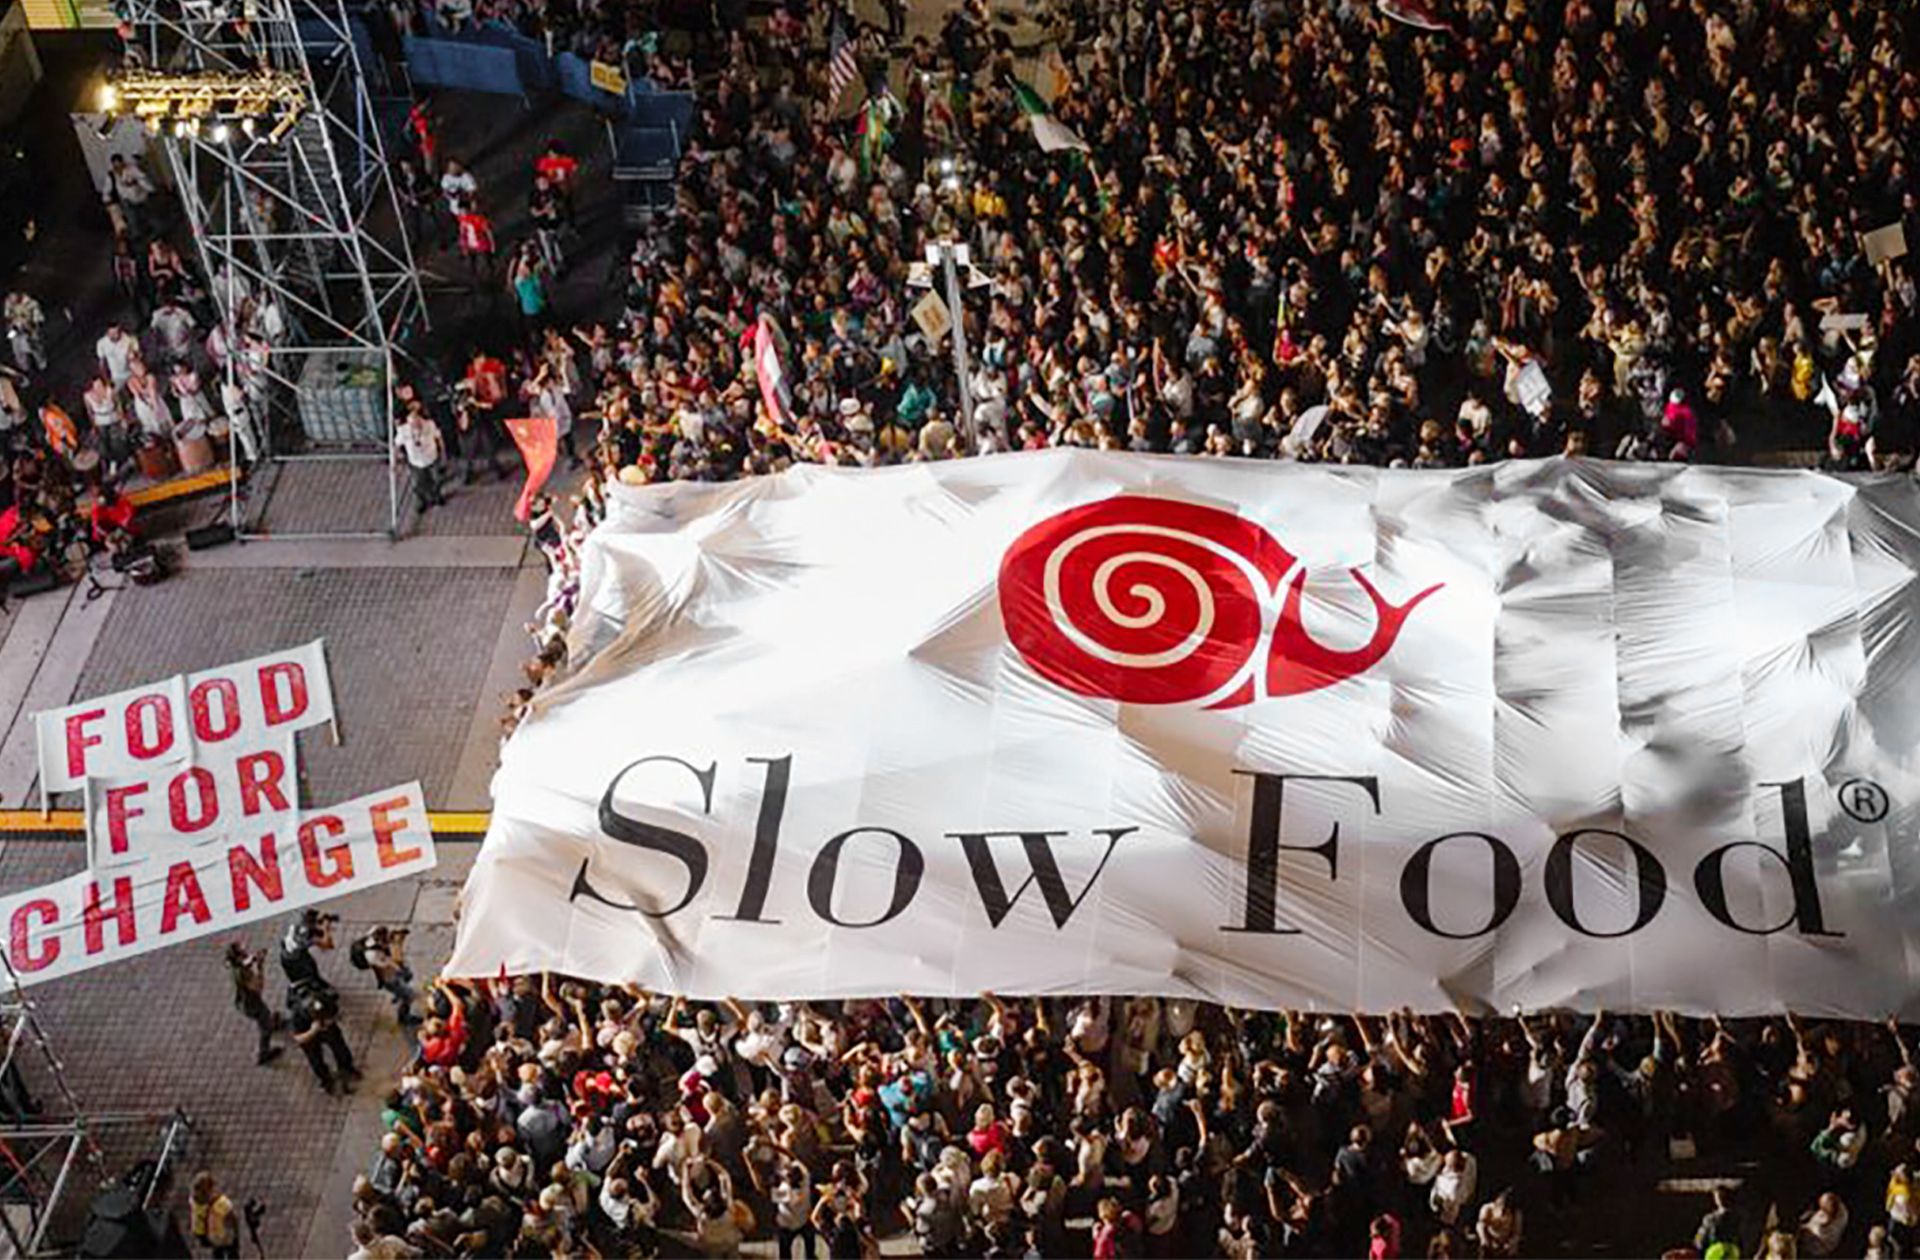 A crowd stands in front of a stage carrying a huge Slow Food banner.